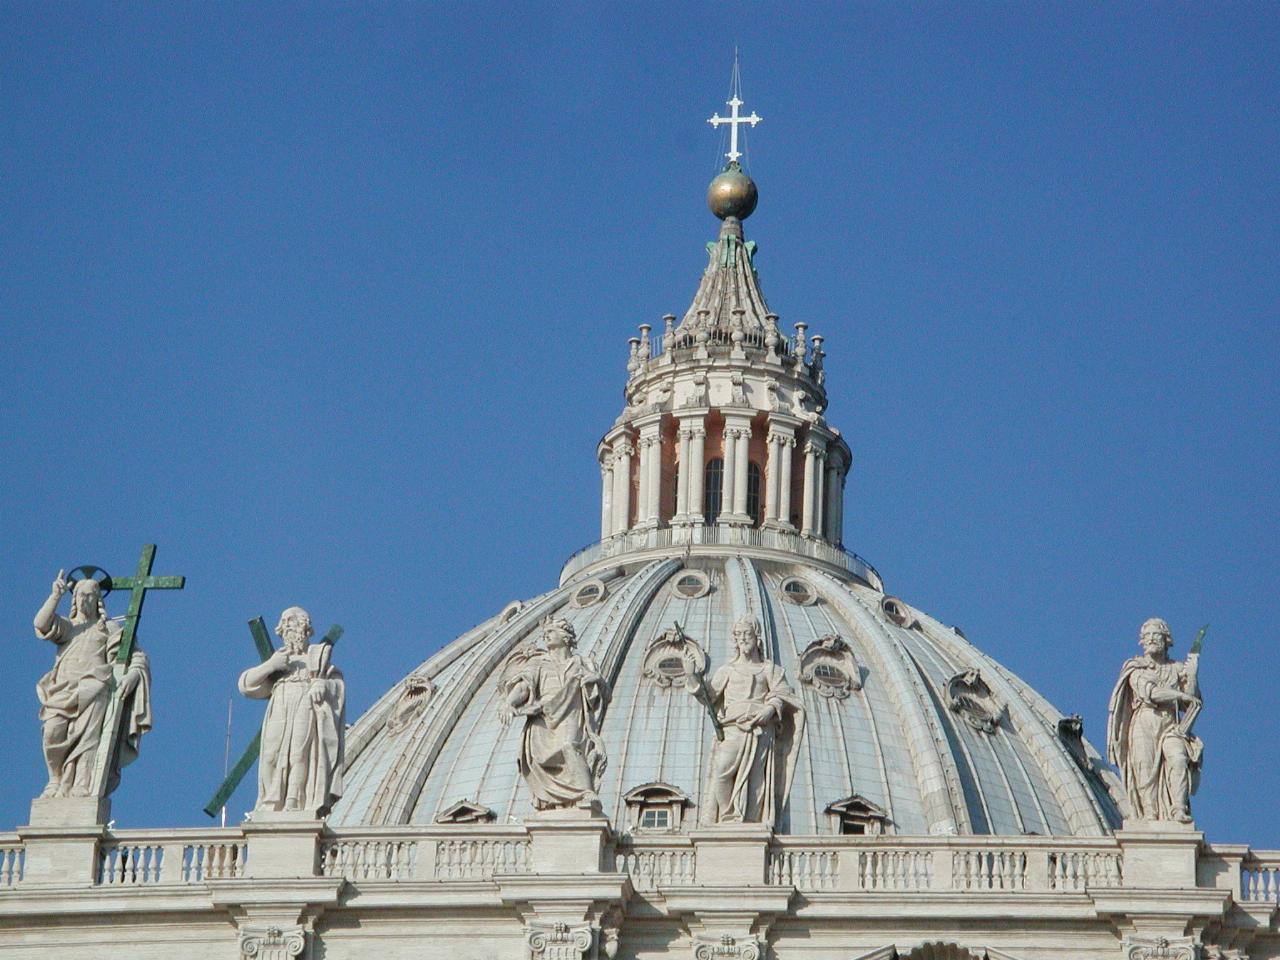 St. Peter's dome and statuary